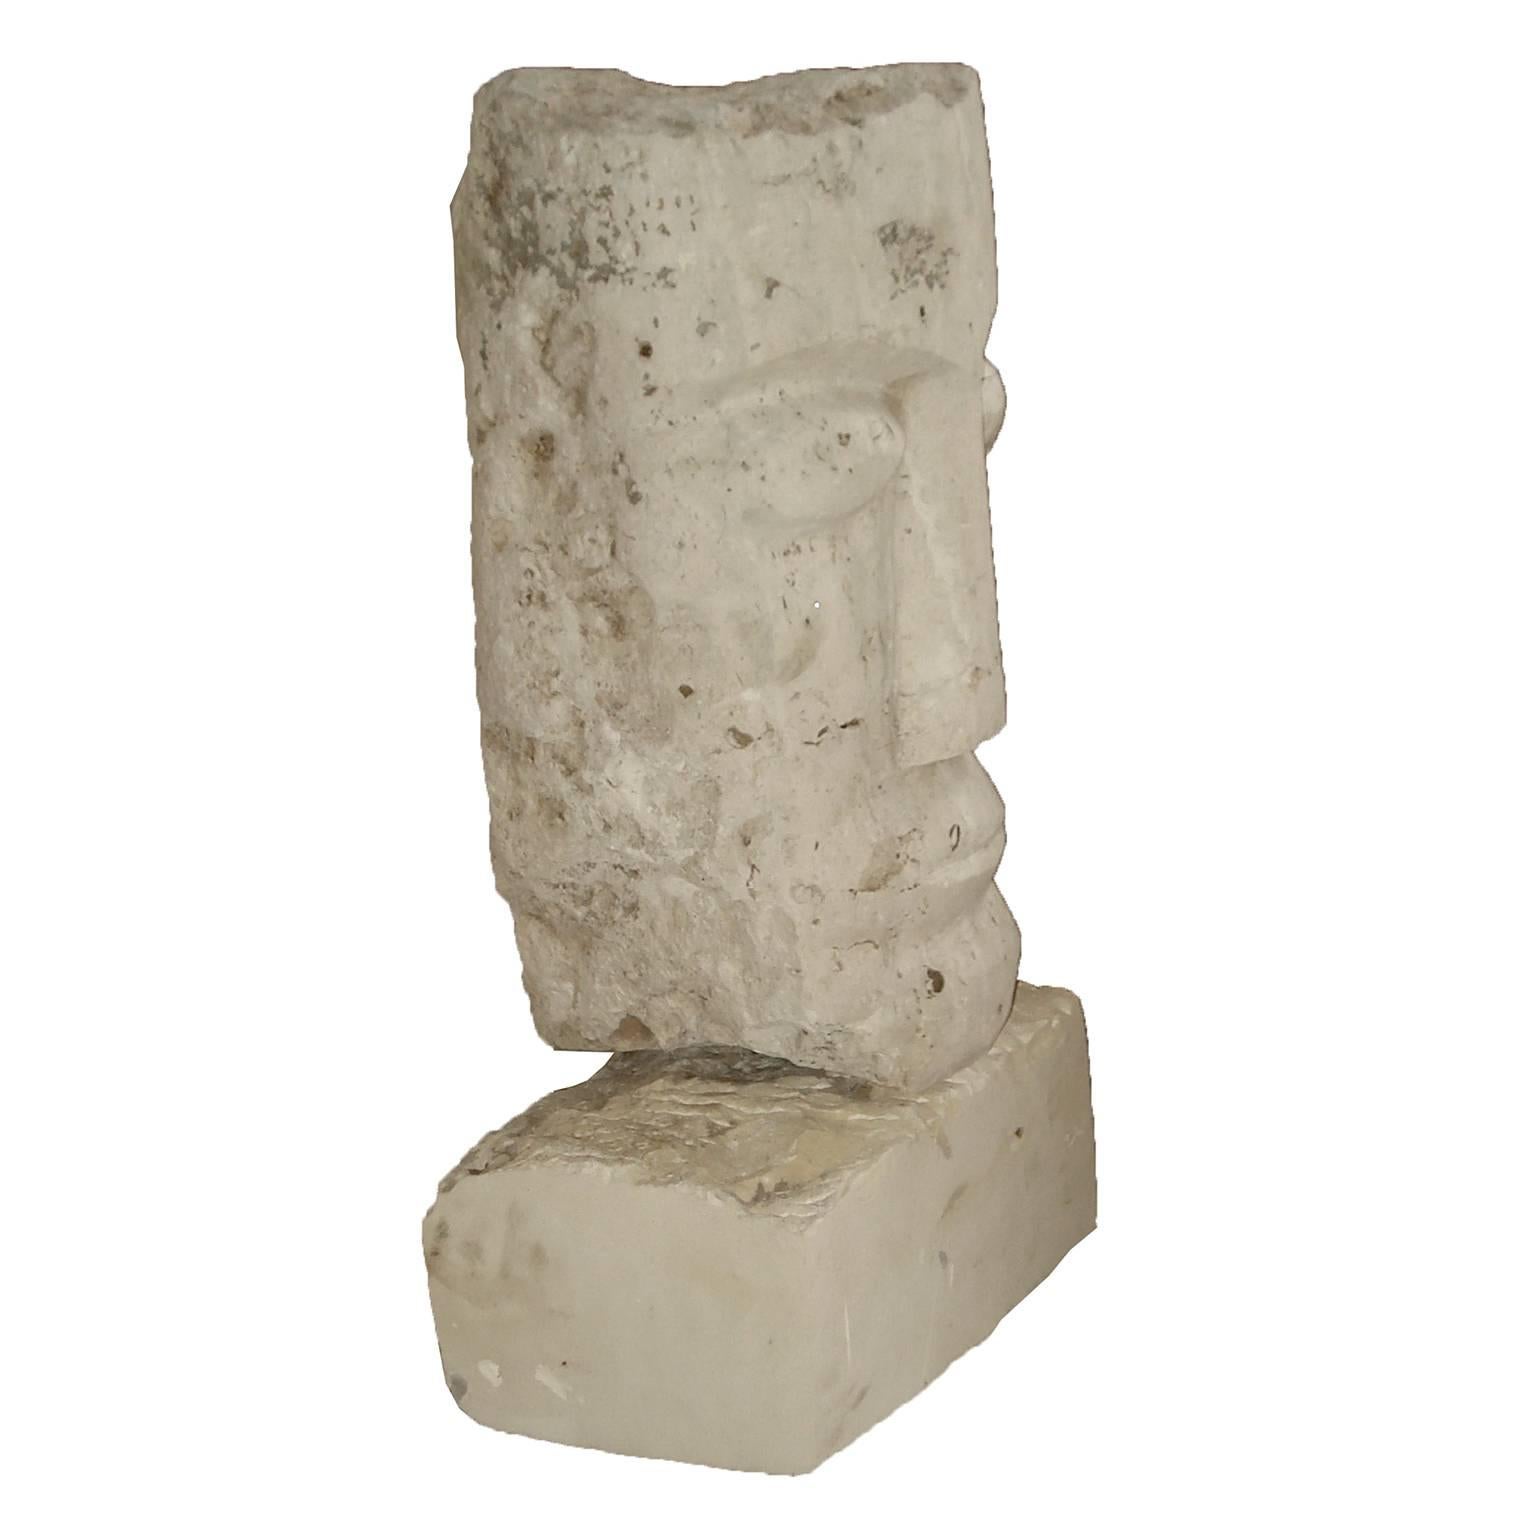 Large Cubist Carved Stone Sculpture Depicting a Man Head For Sale 4